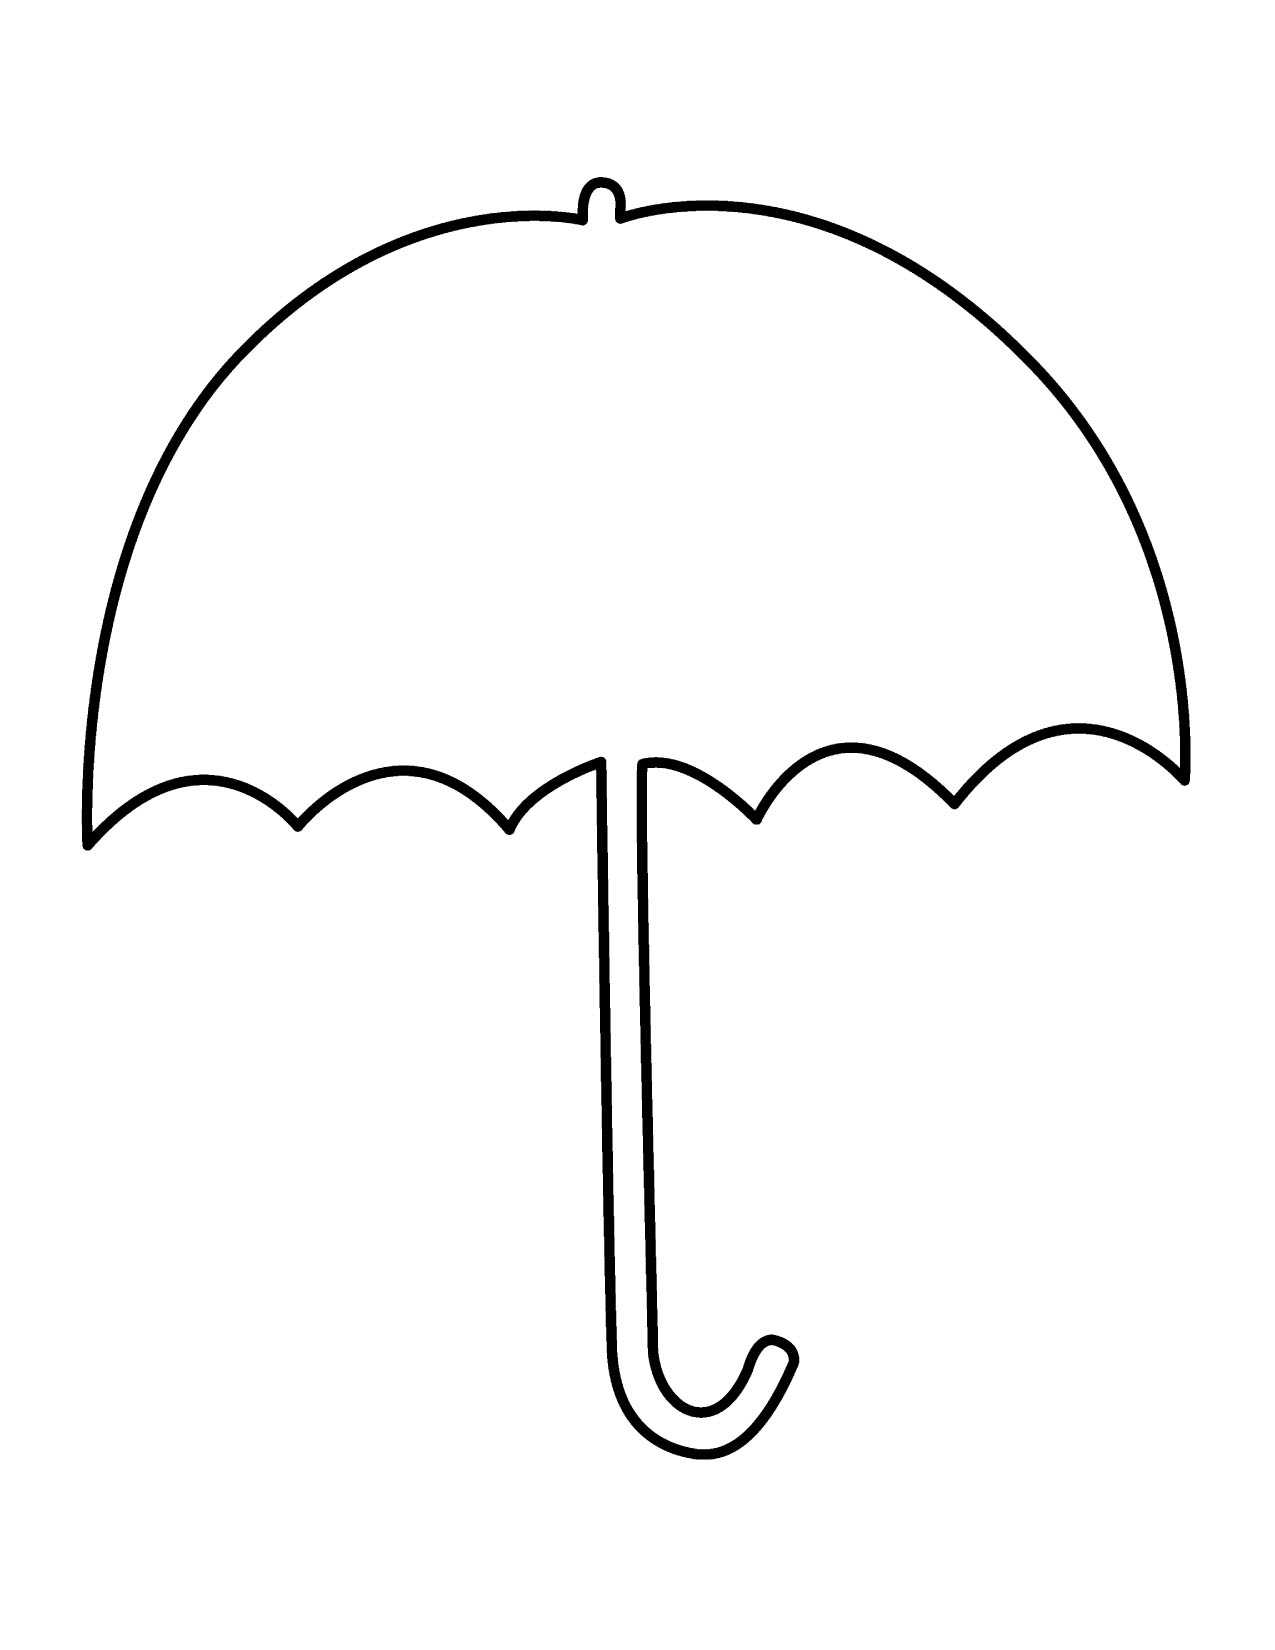 Closed Umbrella Outline Images Pictures – Becuo – Clip Art In Blank Umbrella Template